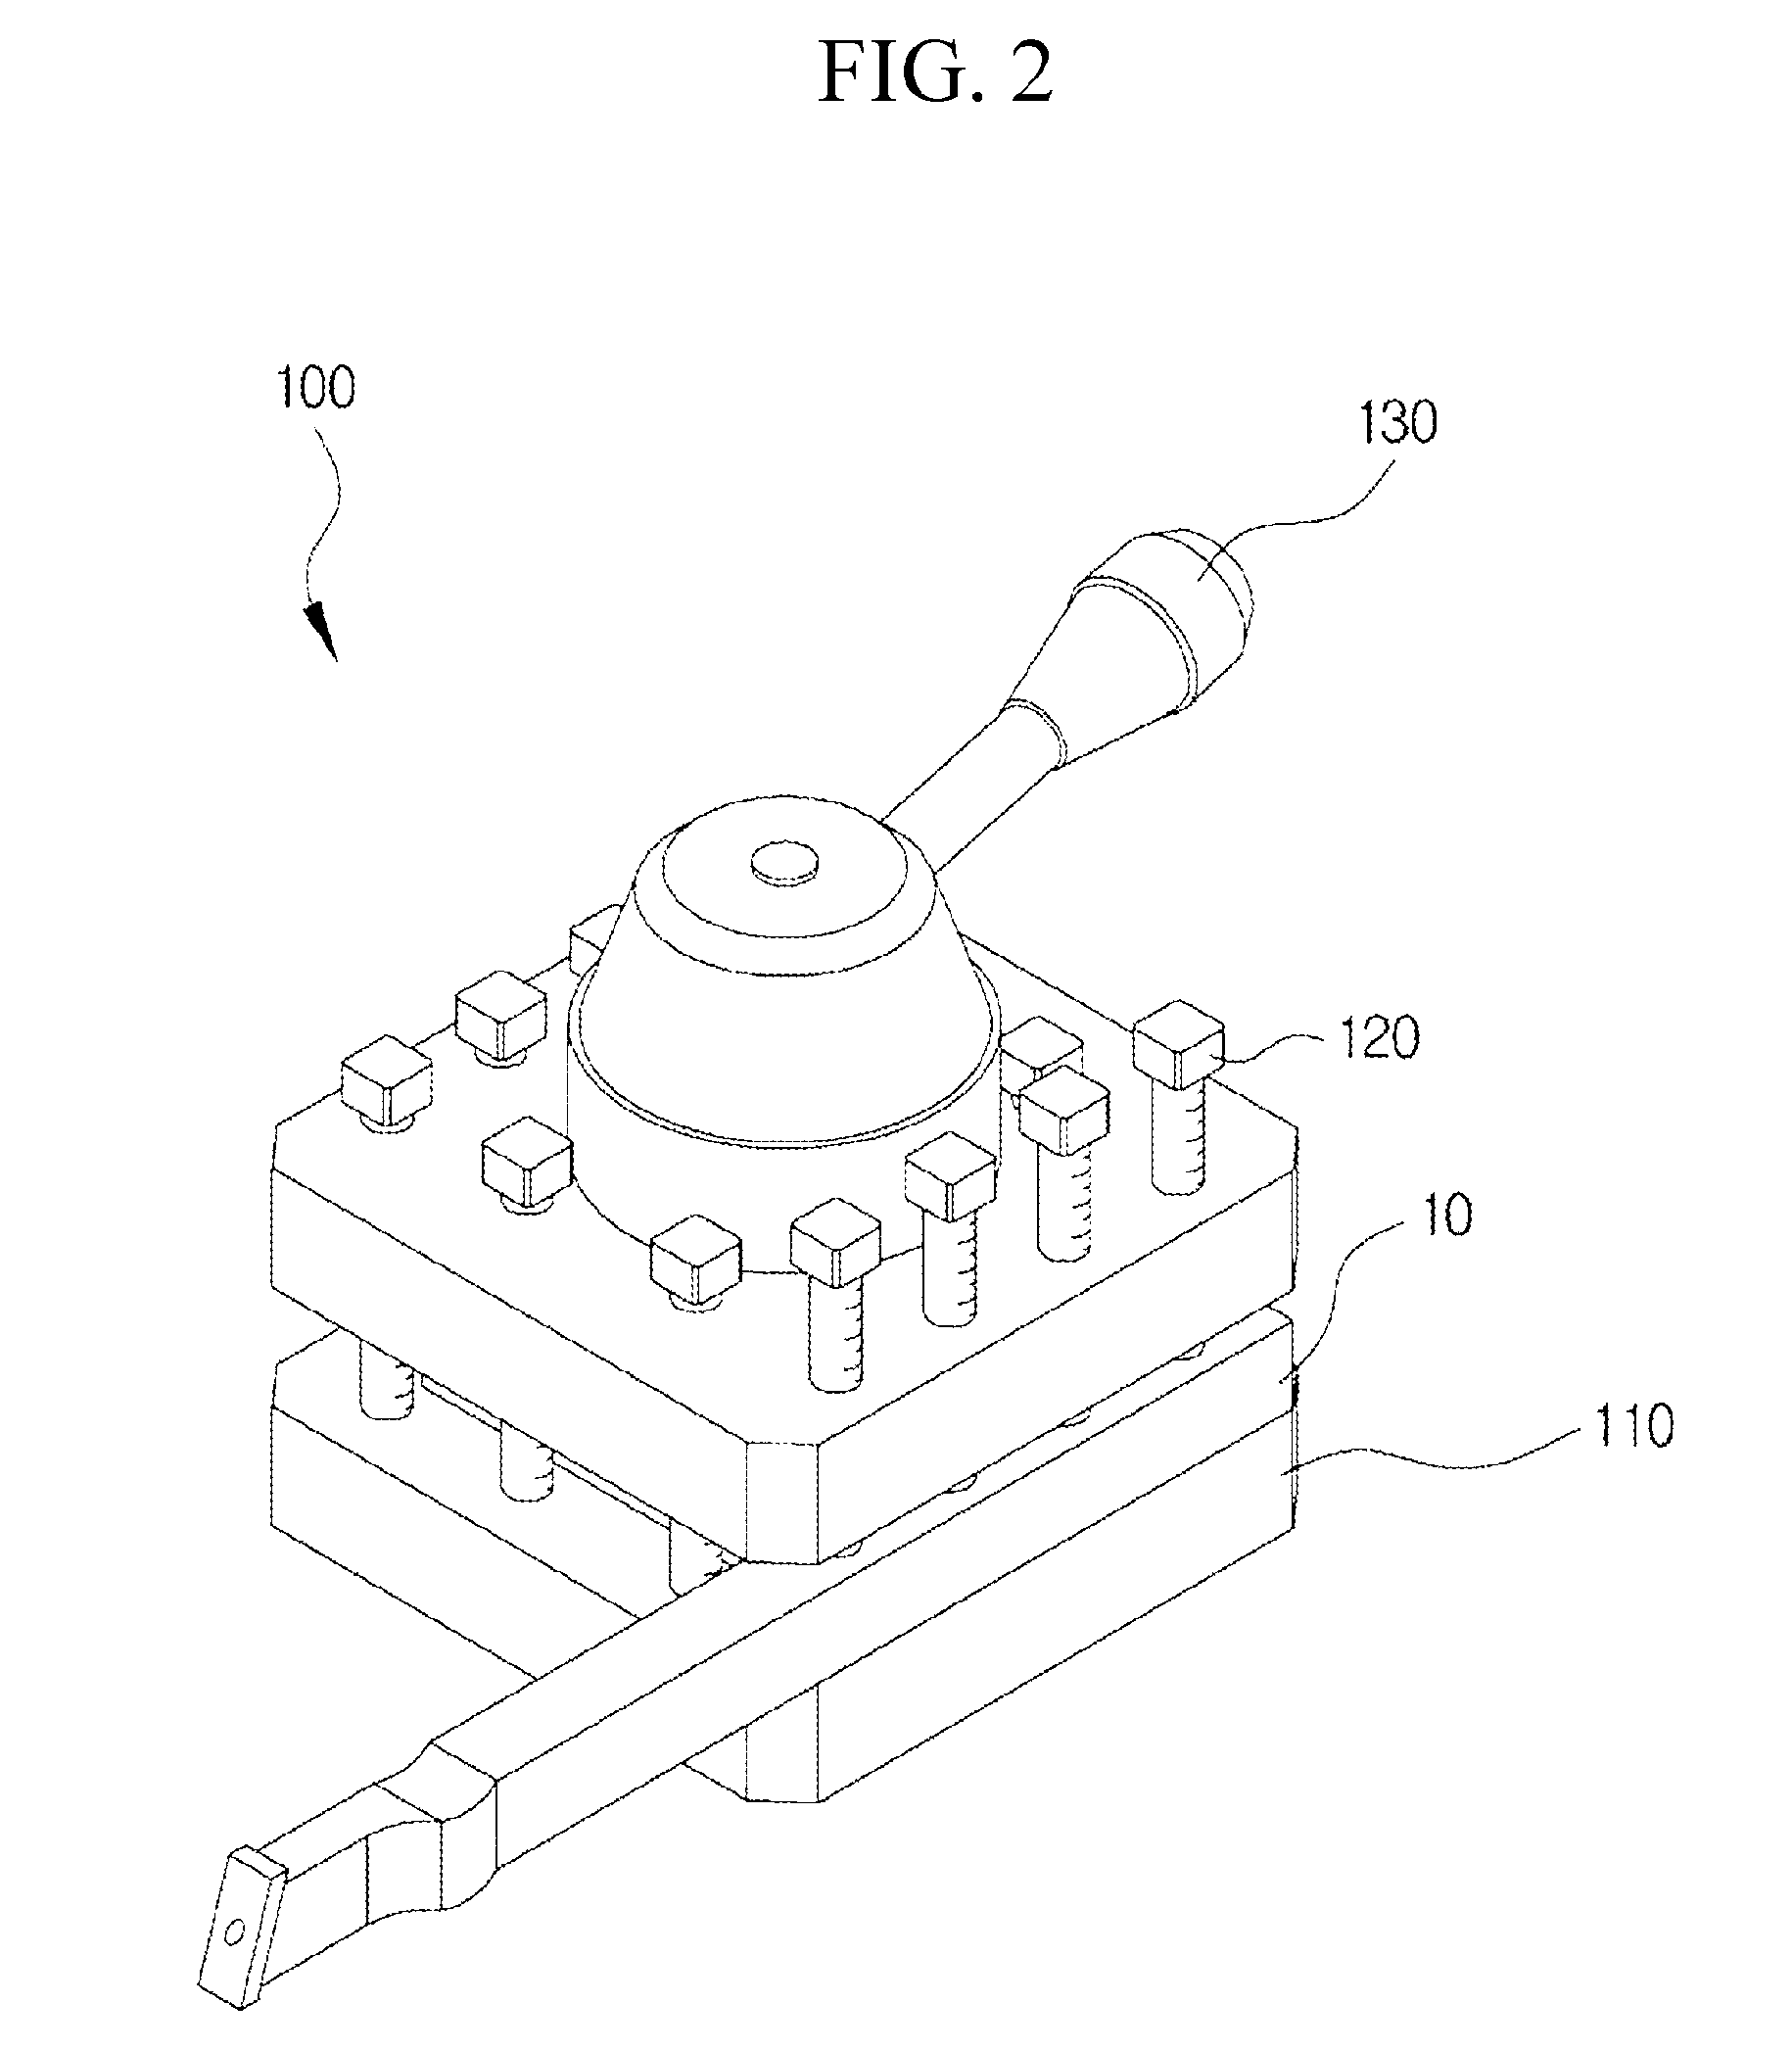 Apparatus and method for attenuation of vibration in machine tool